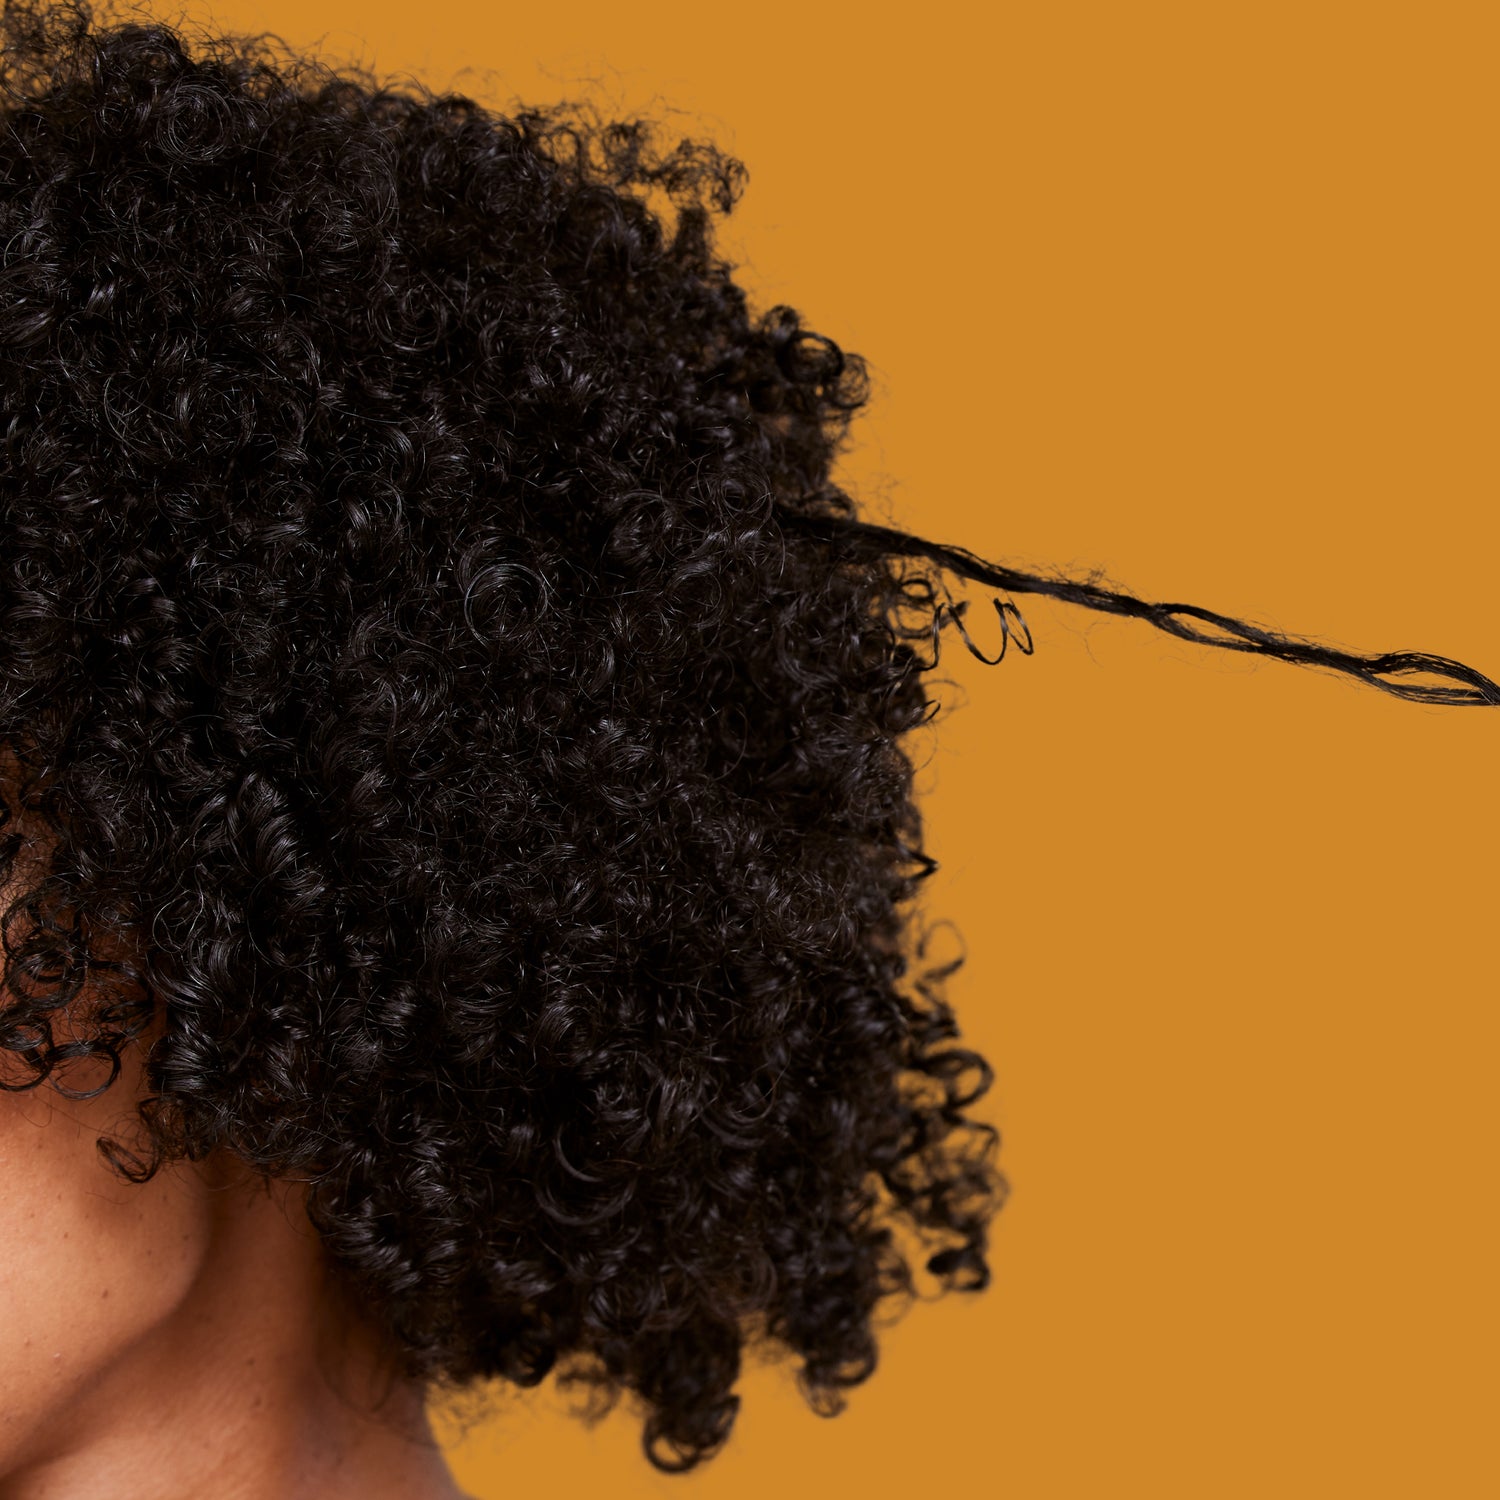 4 Tips For When Using Heat On Your Hair